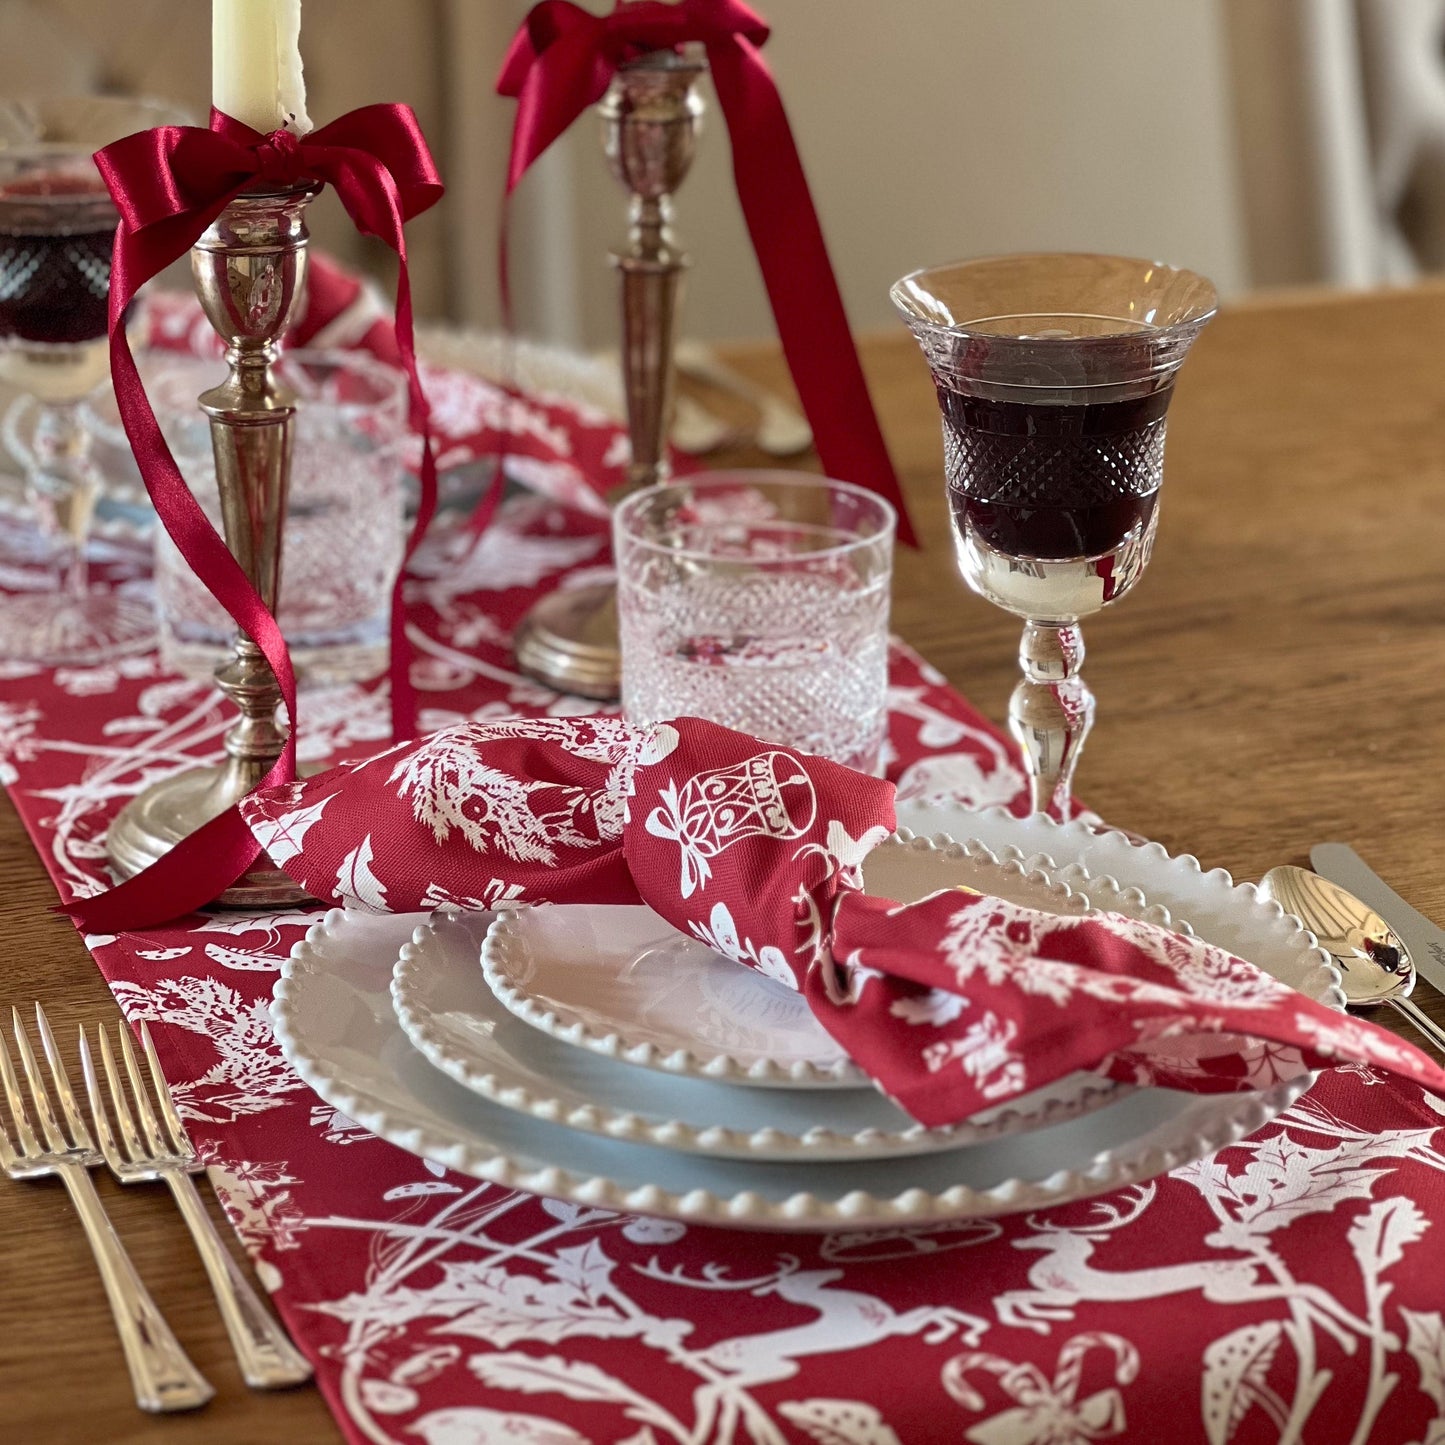 Red Stag & Wreath Table Runner